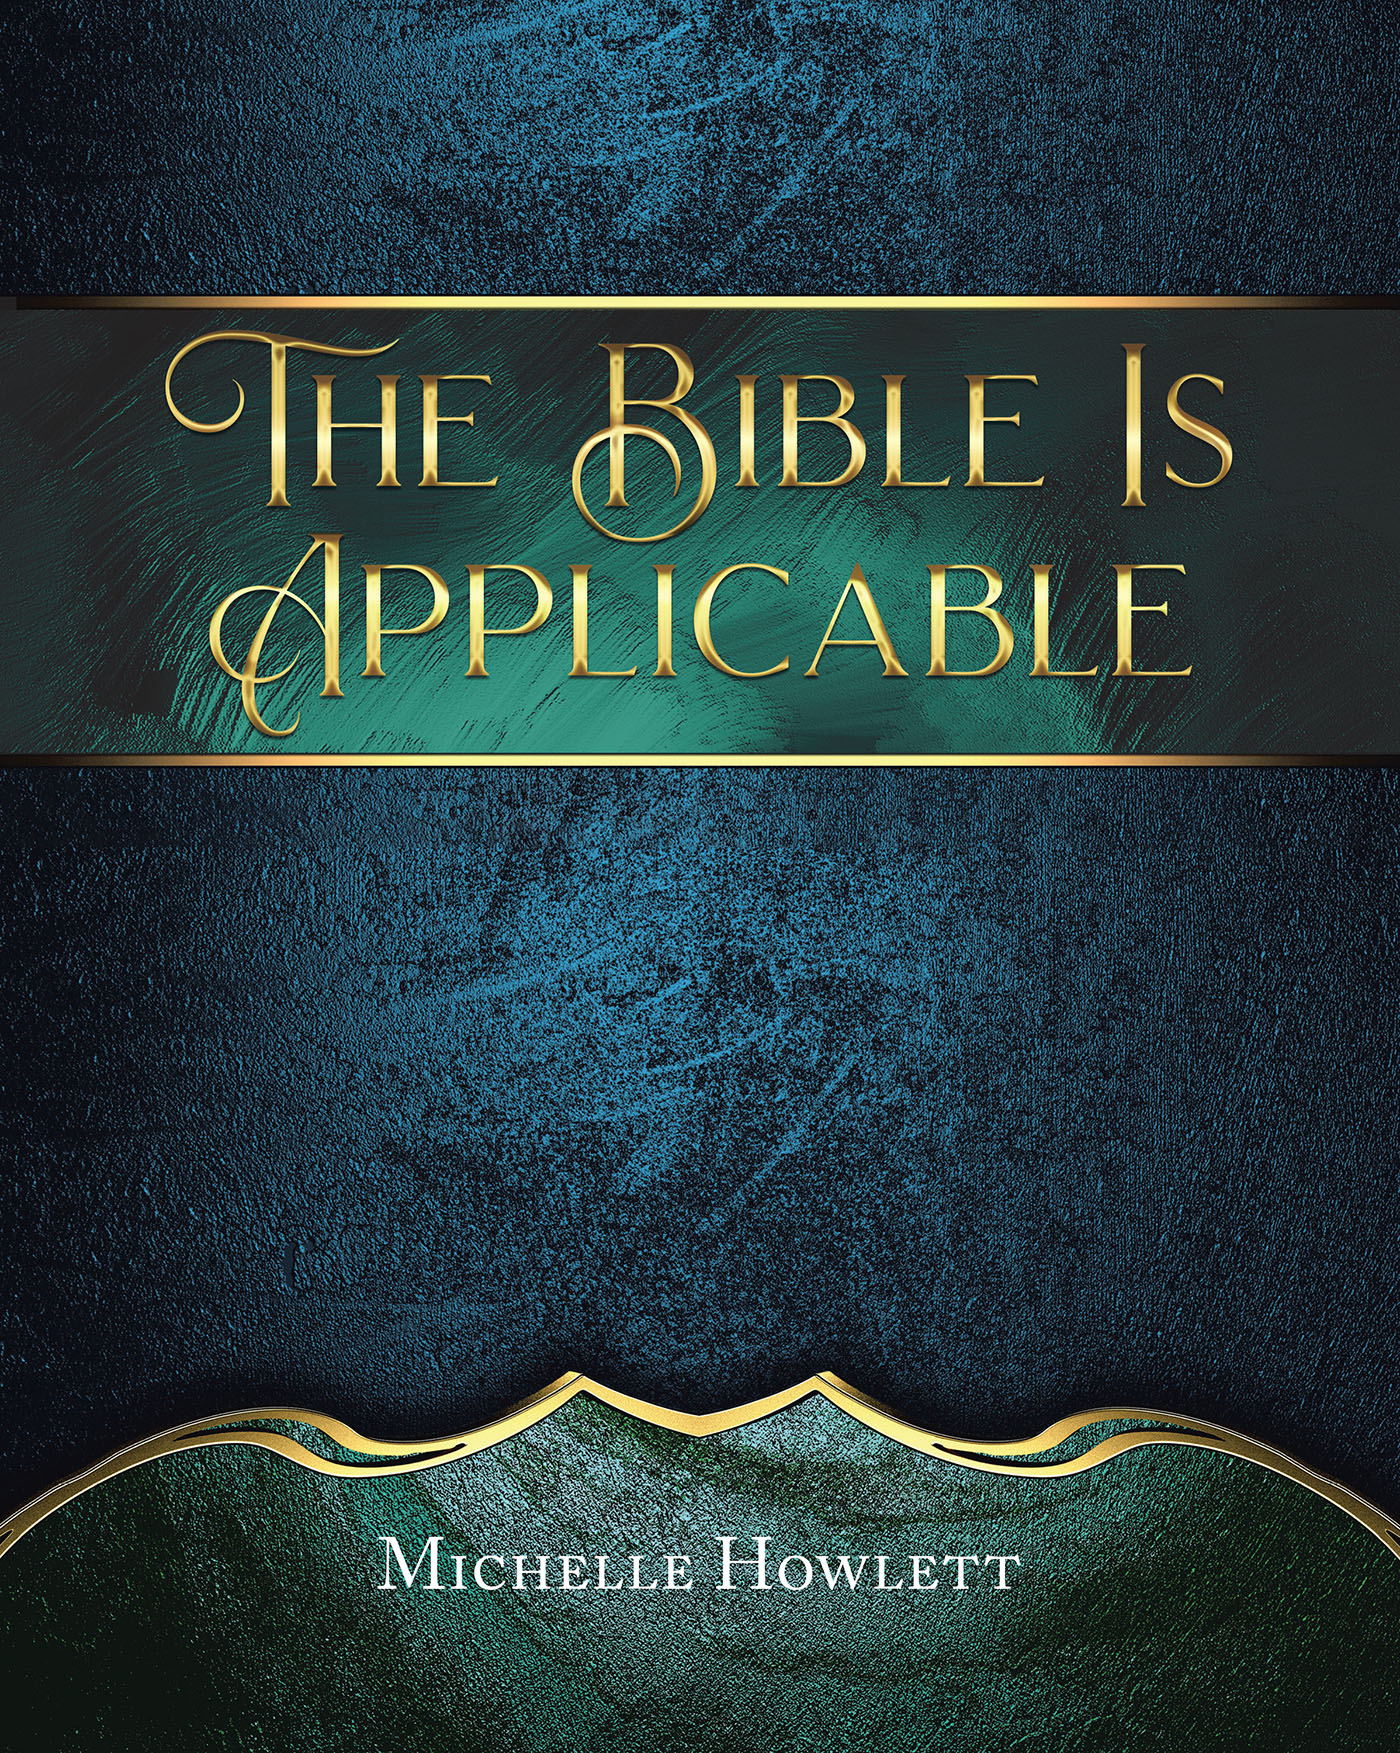 Michelle Howlett’s Newly Released “The Bible Is Applicable: A Bible Study for Grandchildren” is a Helpful Resource for Upcoming Generations